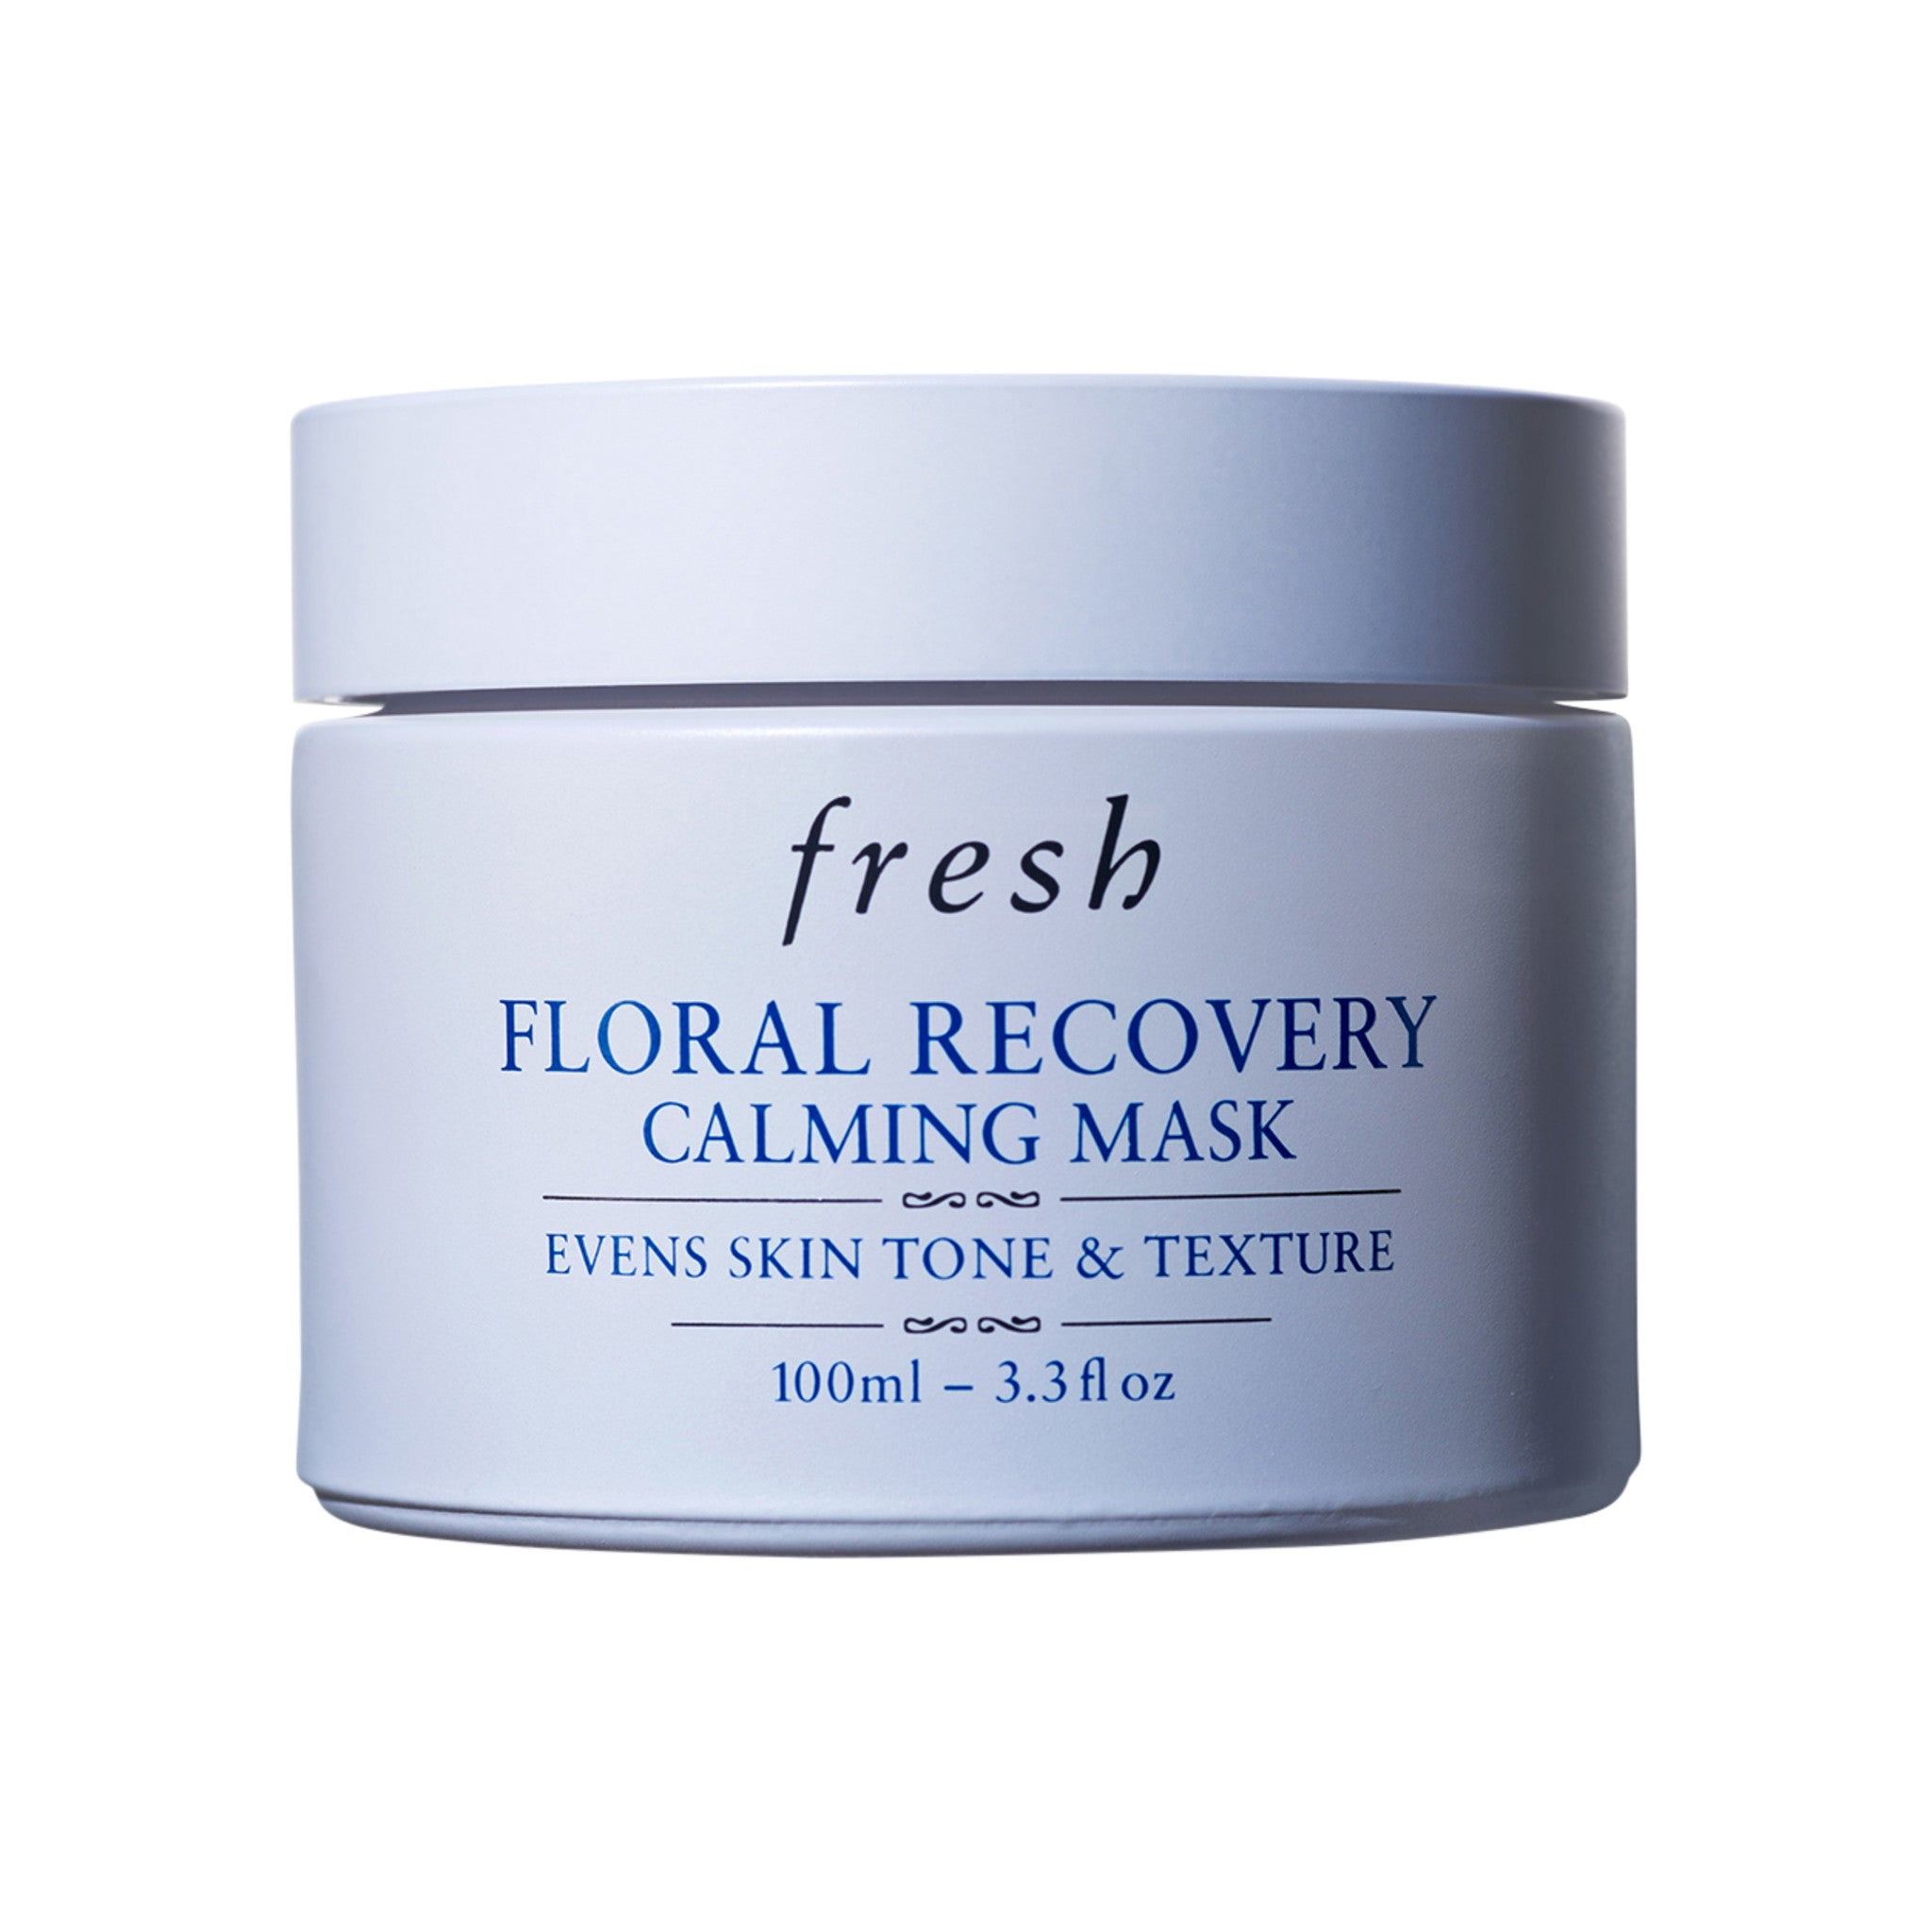 Fresh Floral Recovery Calming Mask main image.